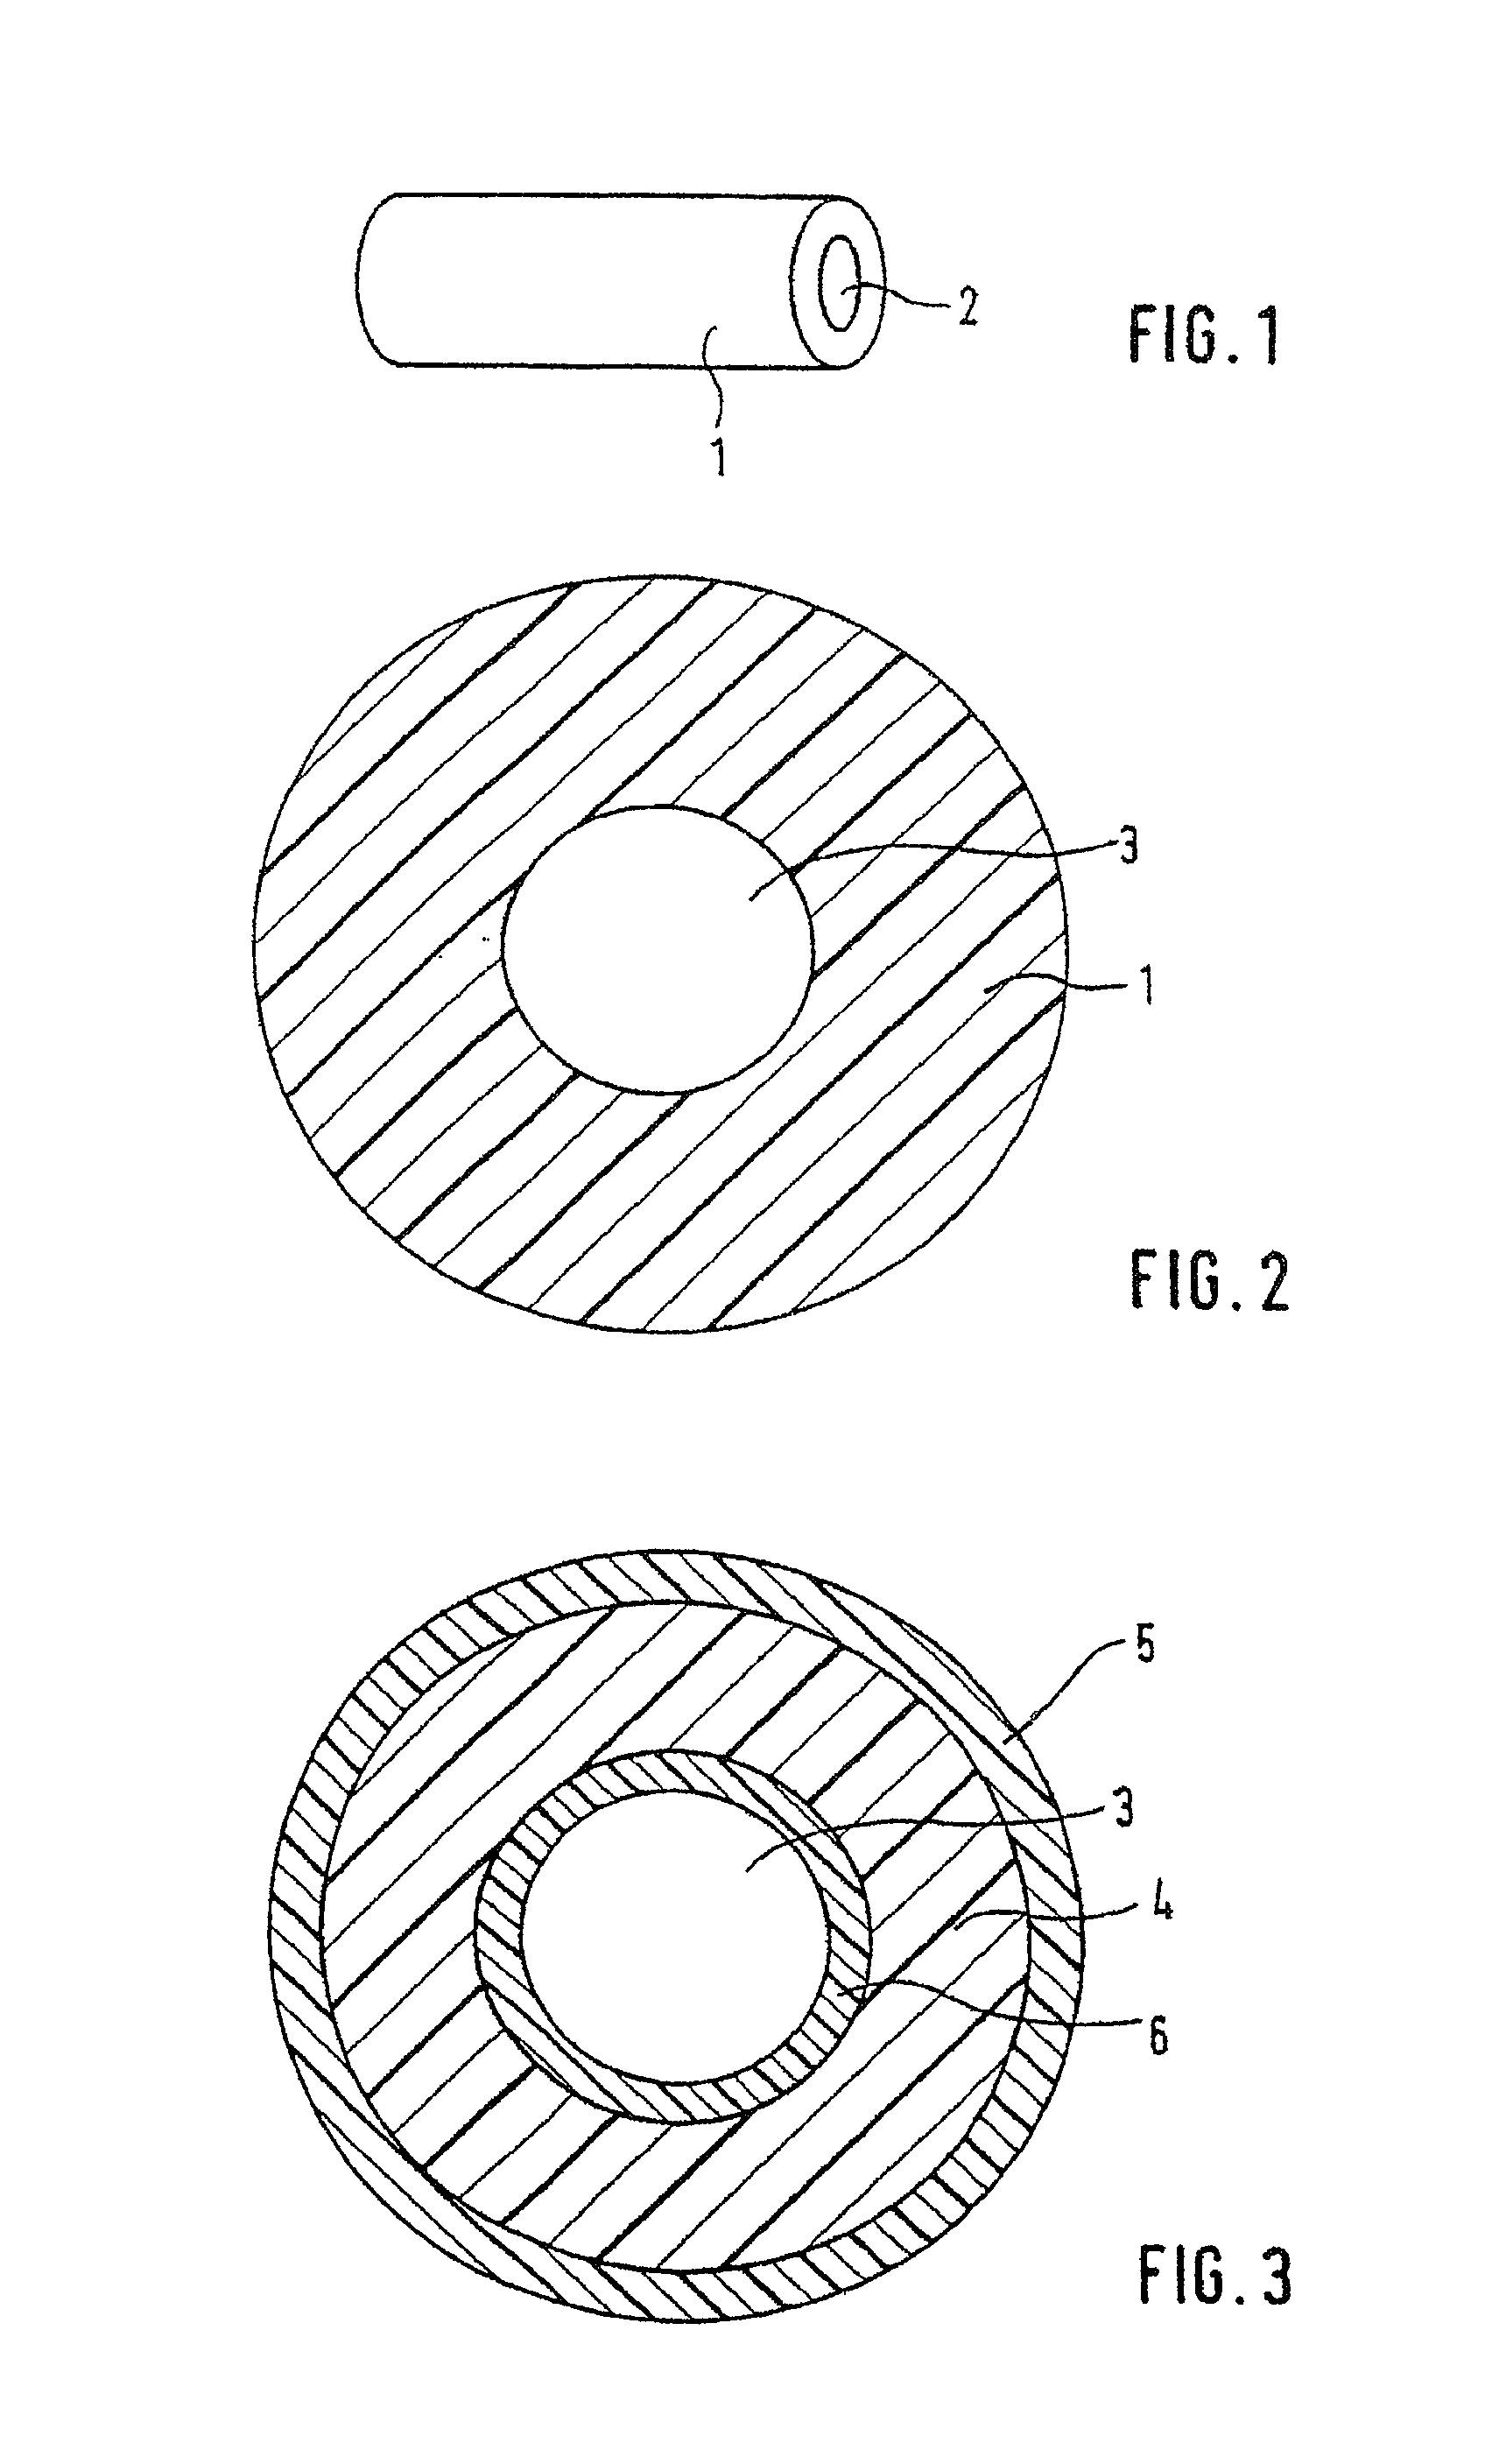 Spacing device for releasing active substances in the paranasal sinus